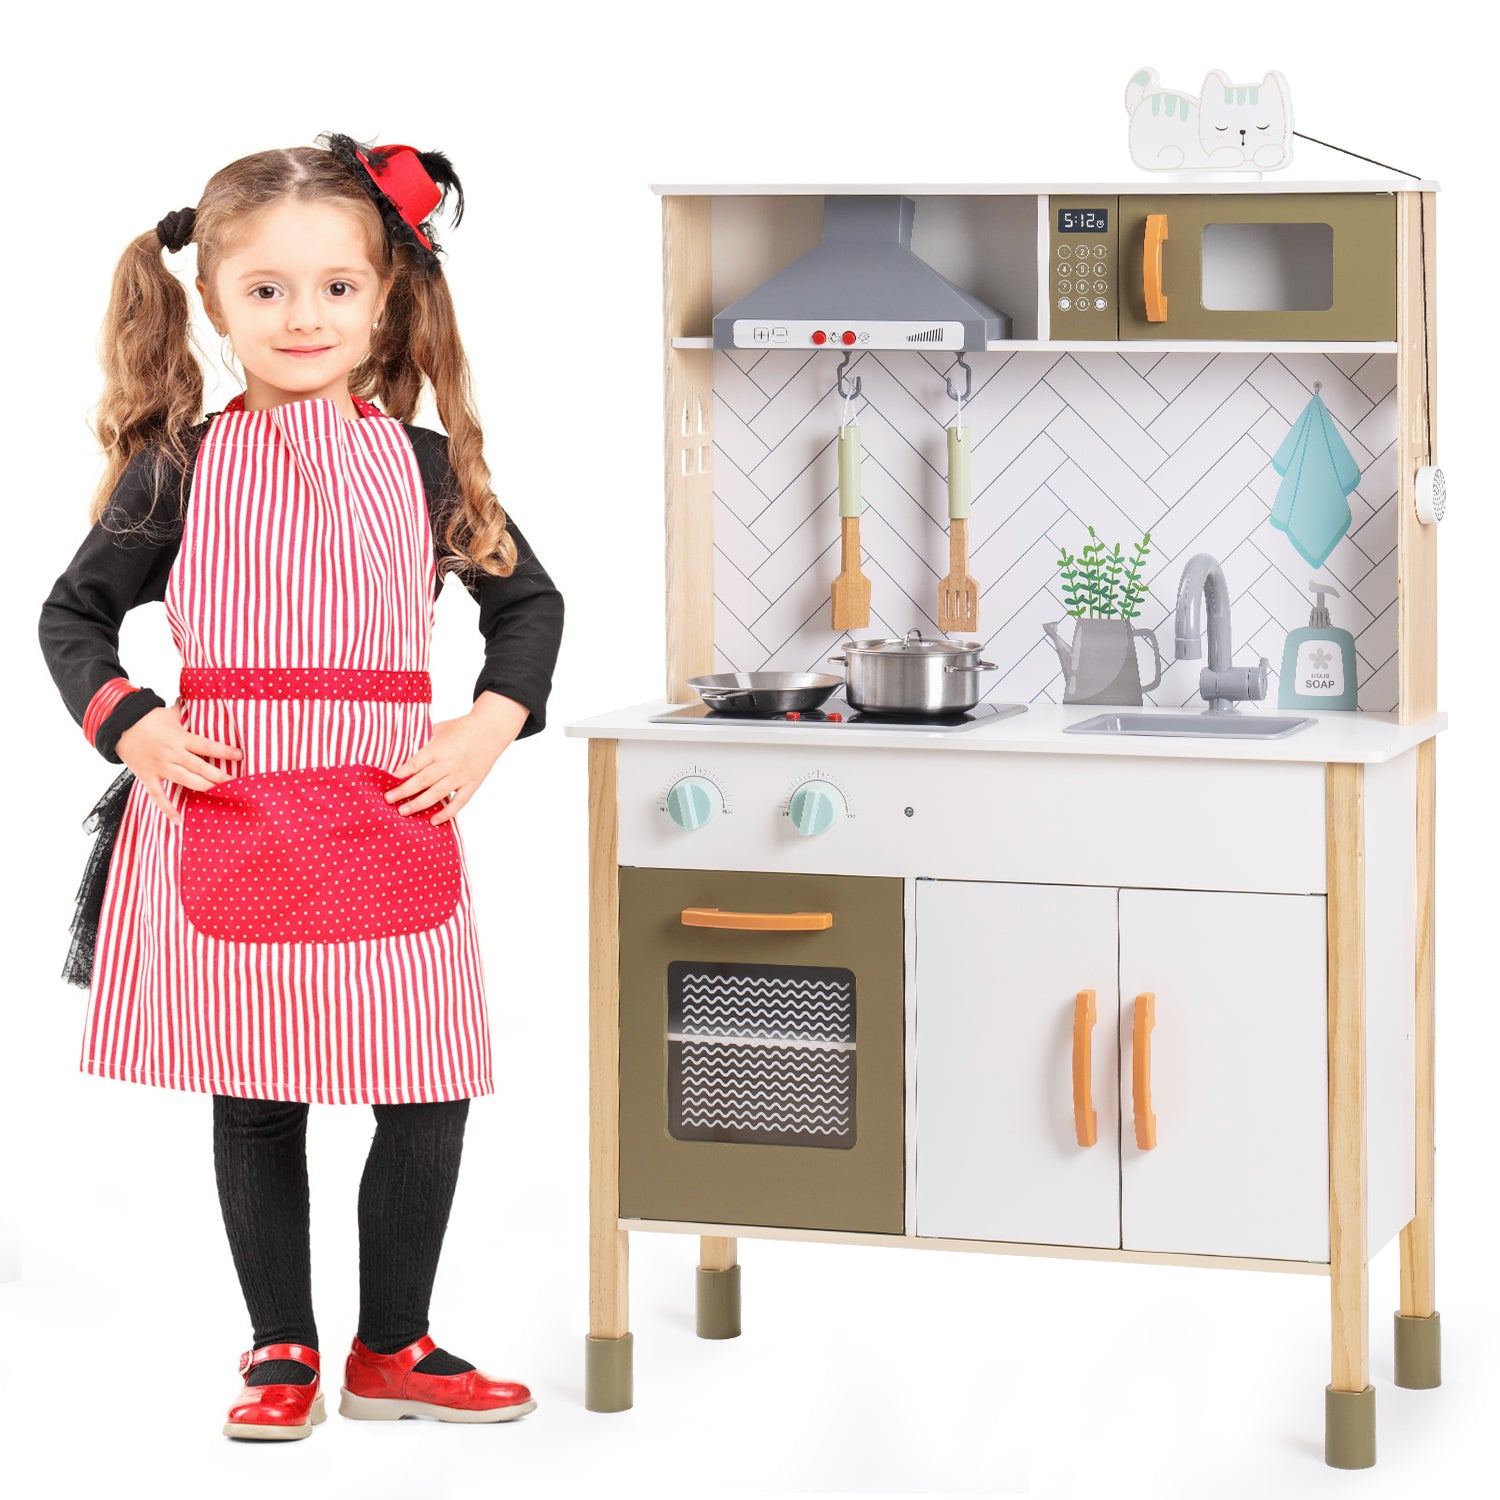 Classic Wooden Kitchen playset, Great Gift for